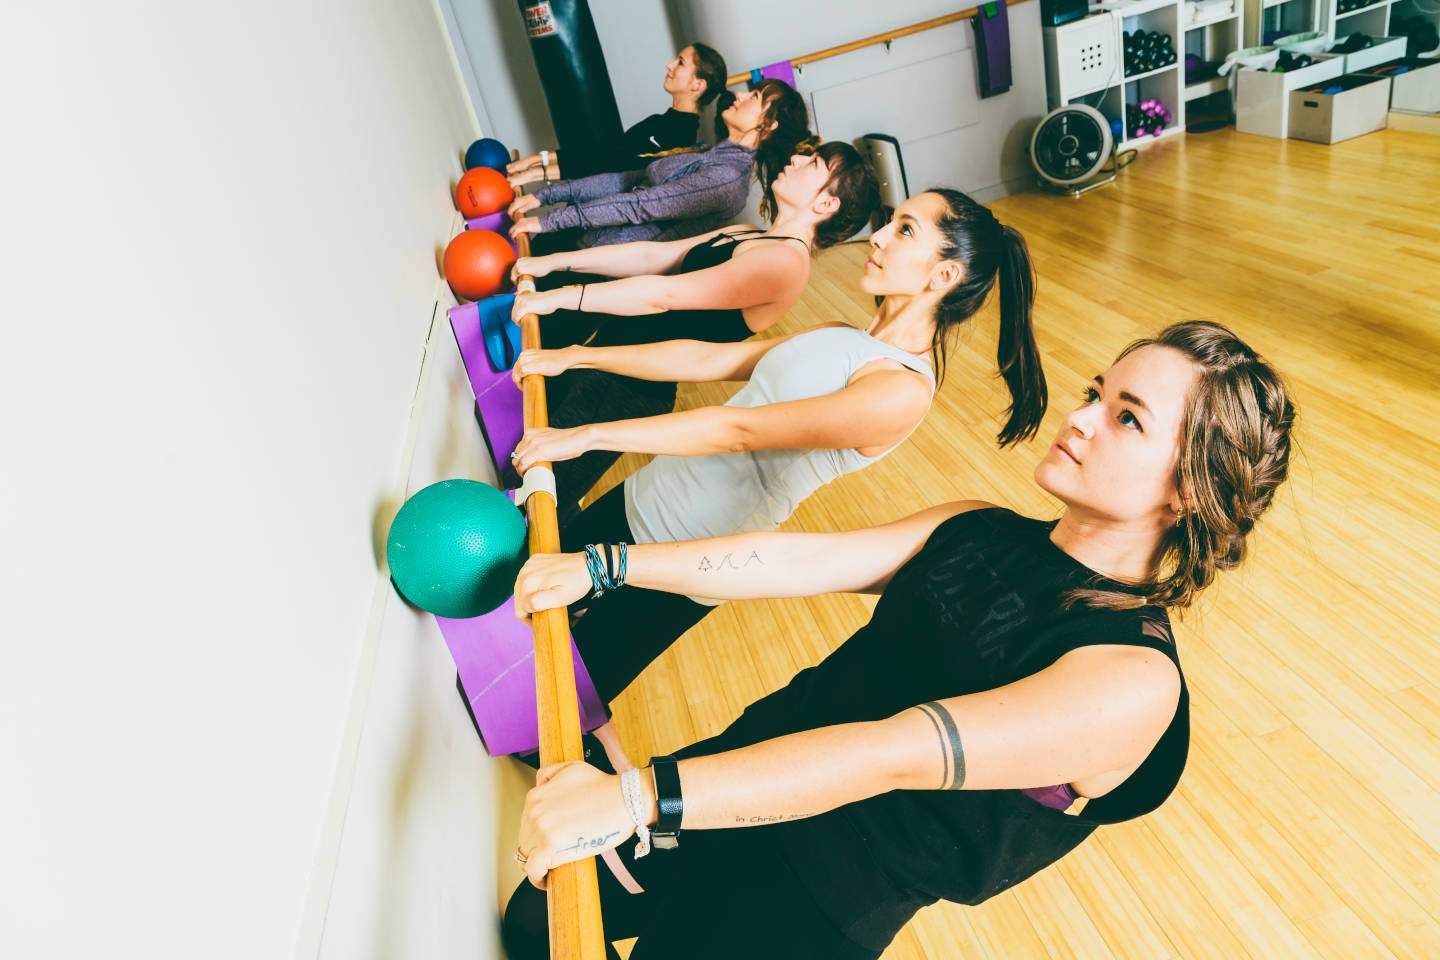 Small Biz Saturday: Vie Fitness & Spa in Ann Arbor to take its time reopening